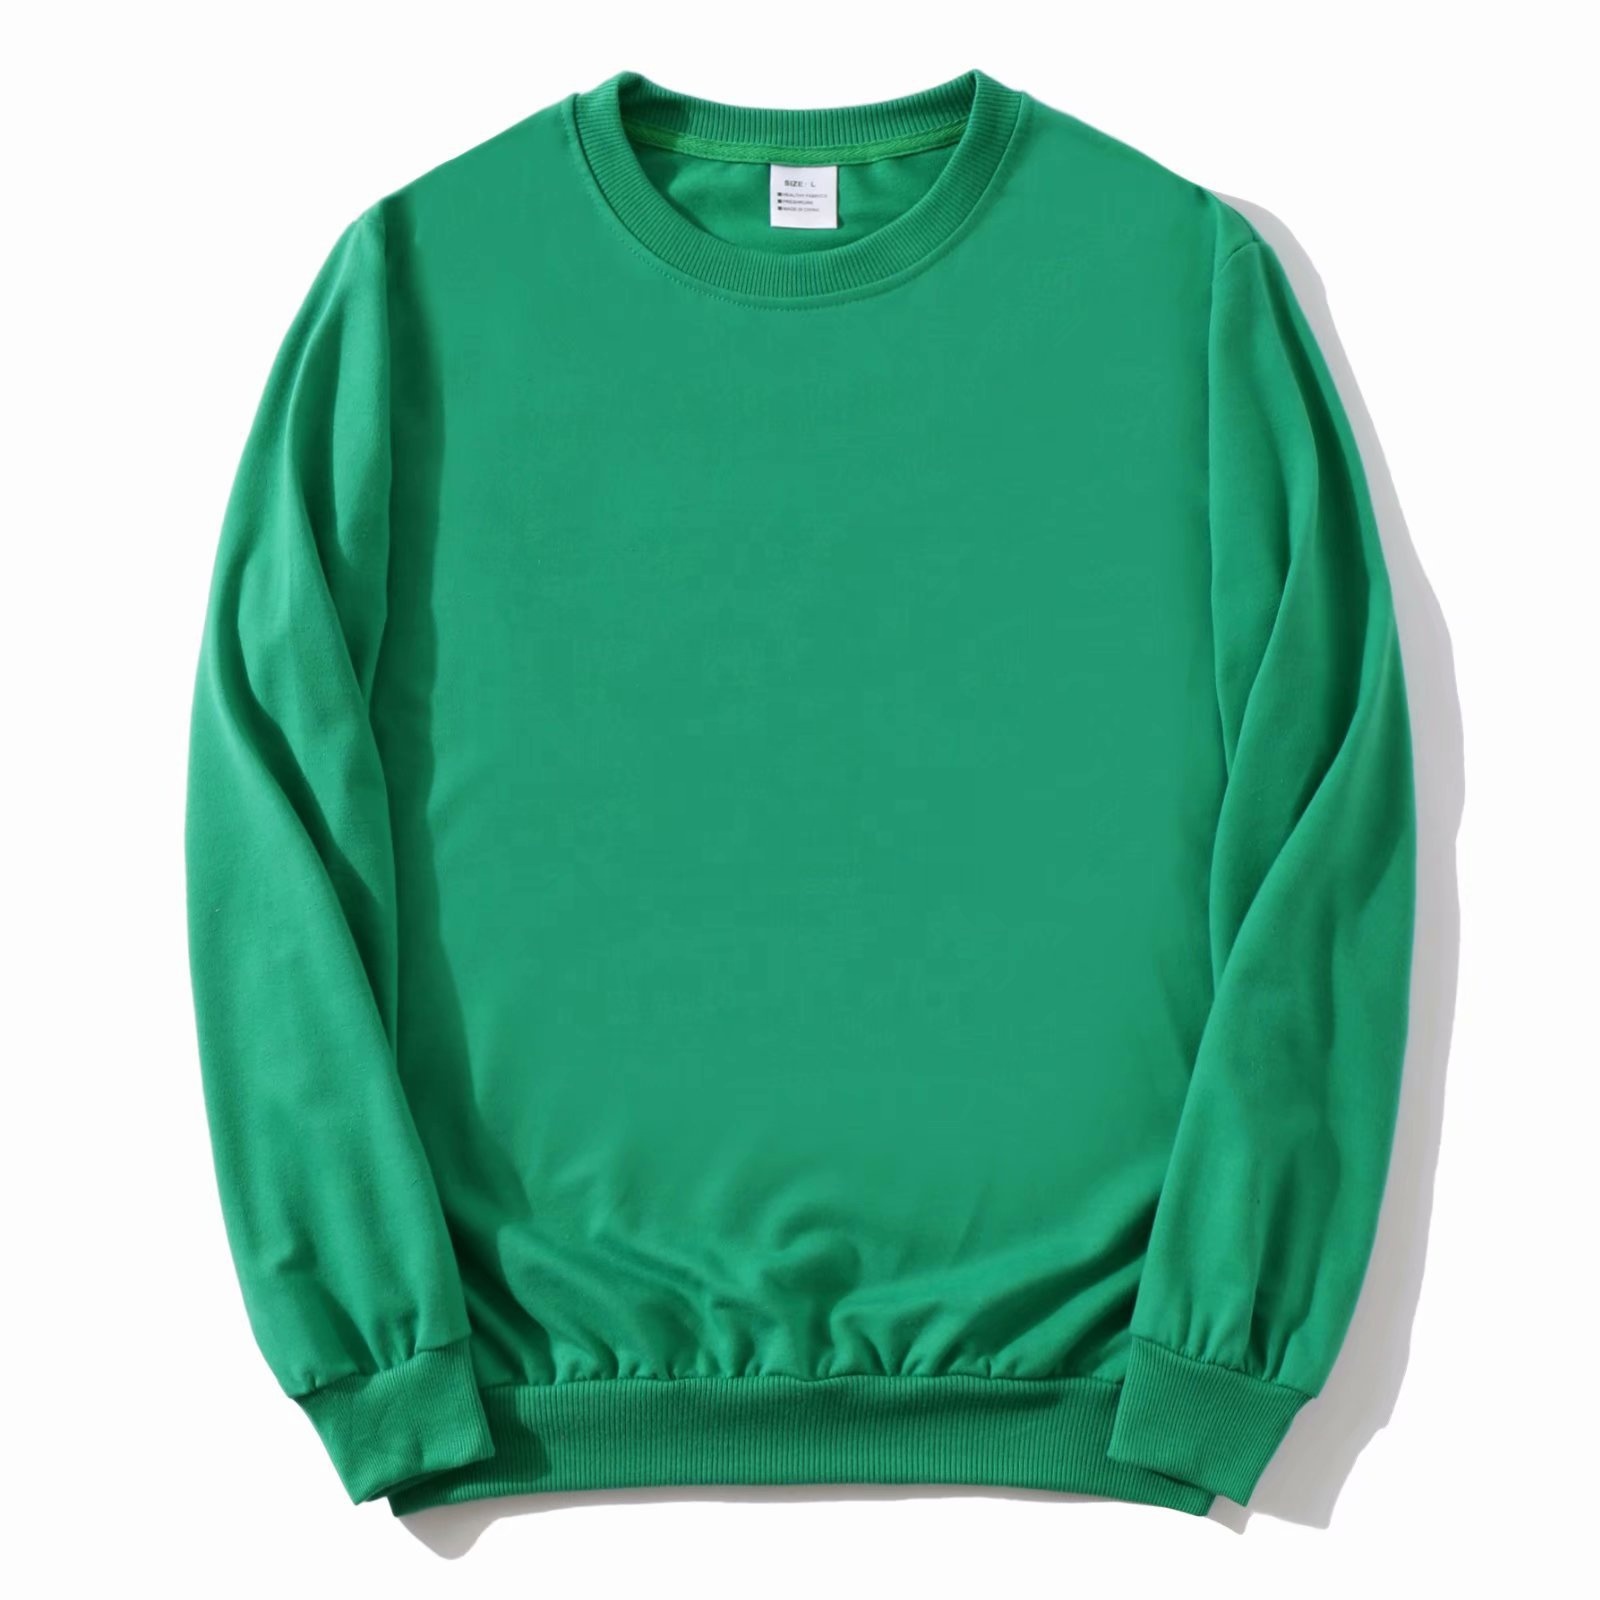 Low moq thin french terry men's women's sweatshirts green plus size loose round neck casual sweaters in autumn